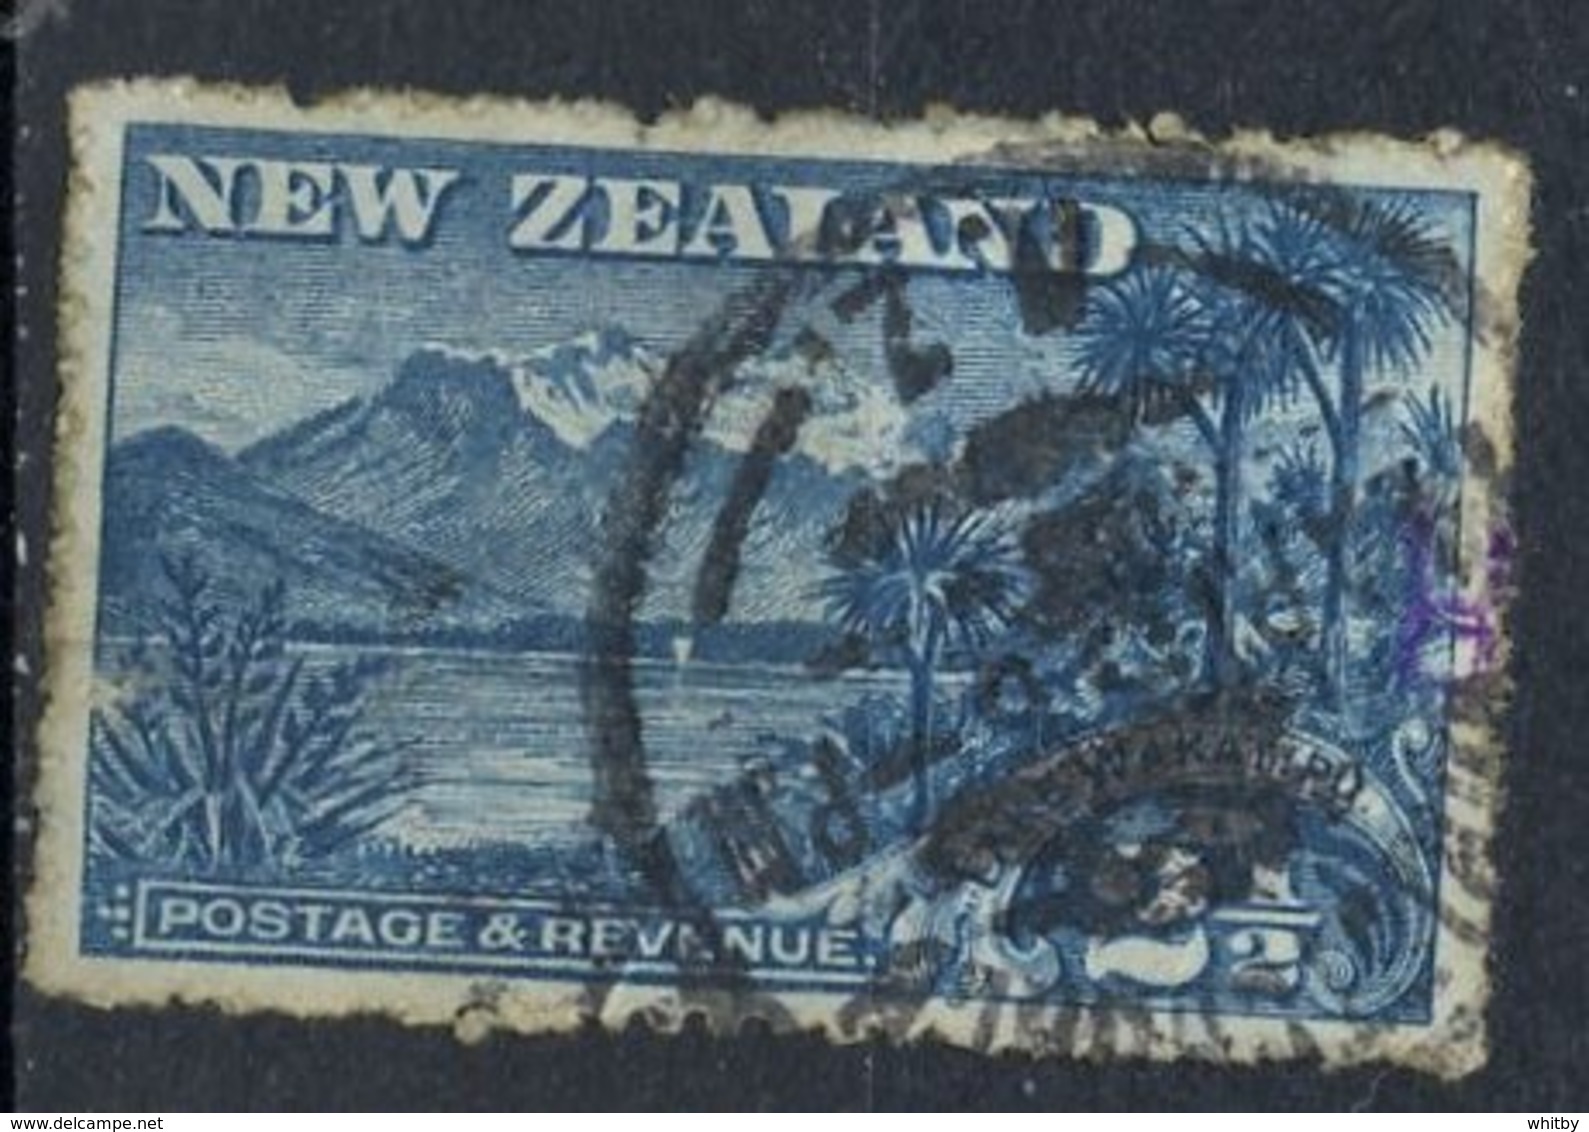 New Zealand 1898 2 1/2p Mt. Earnslaw, Issue #74 - Used Stamps